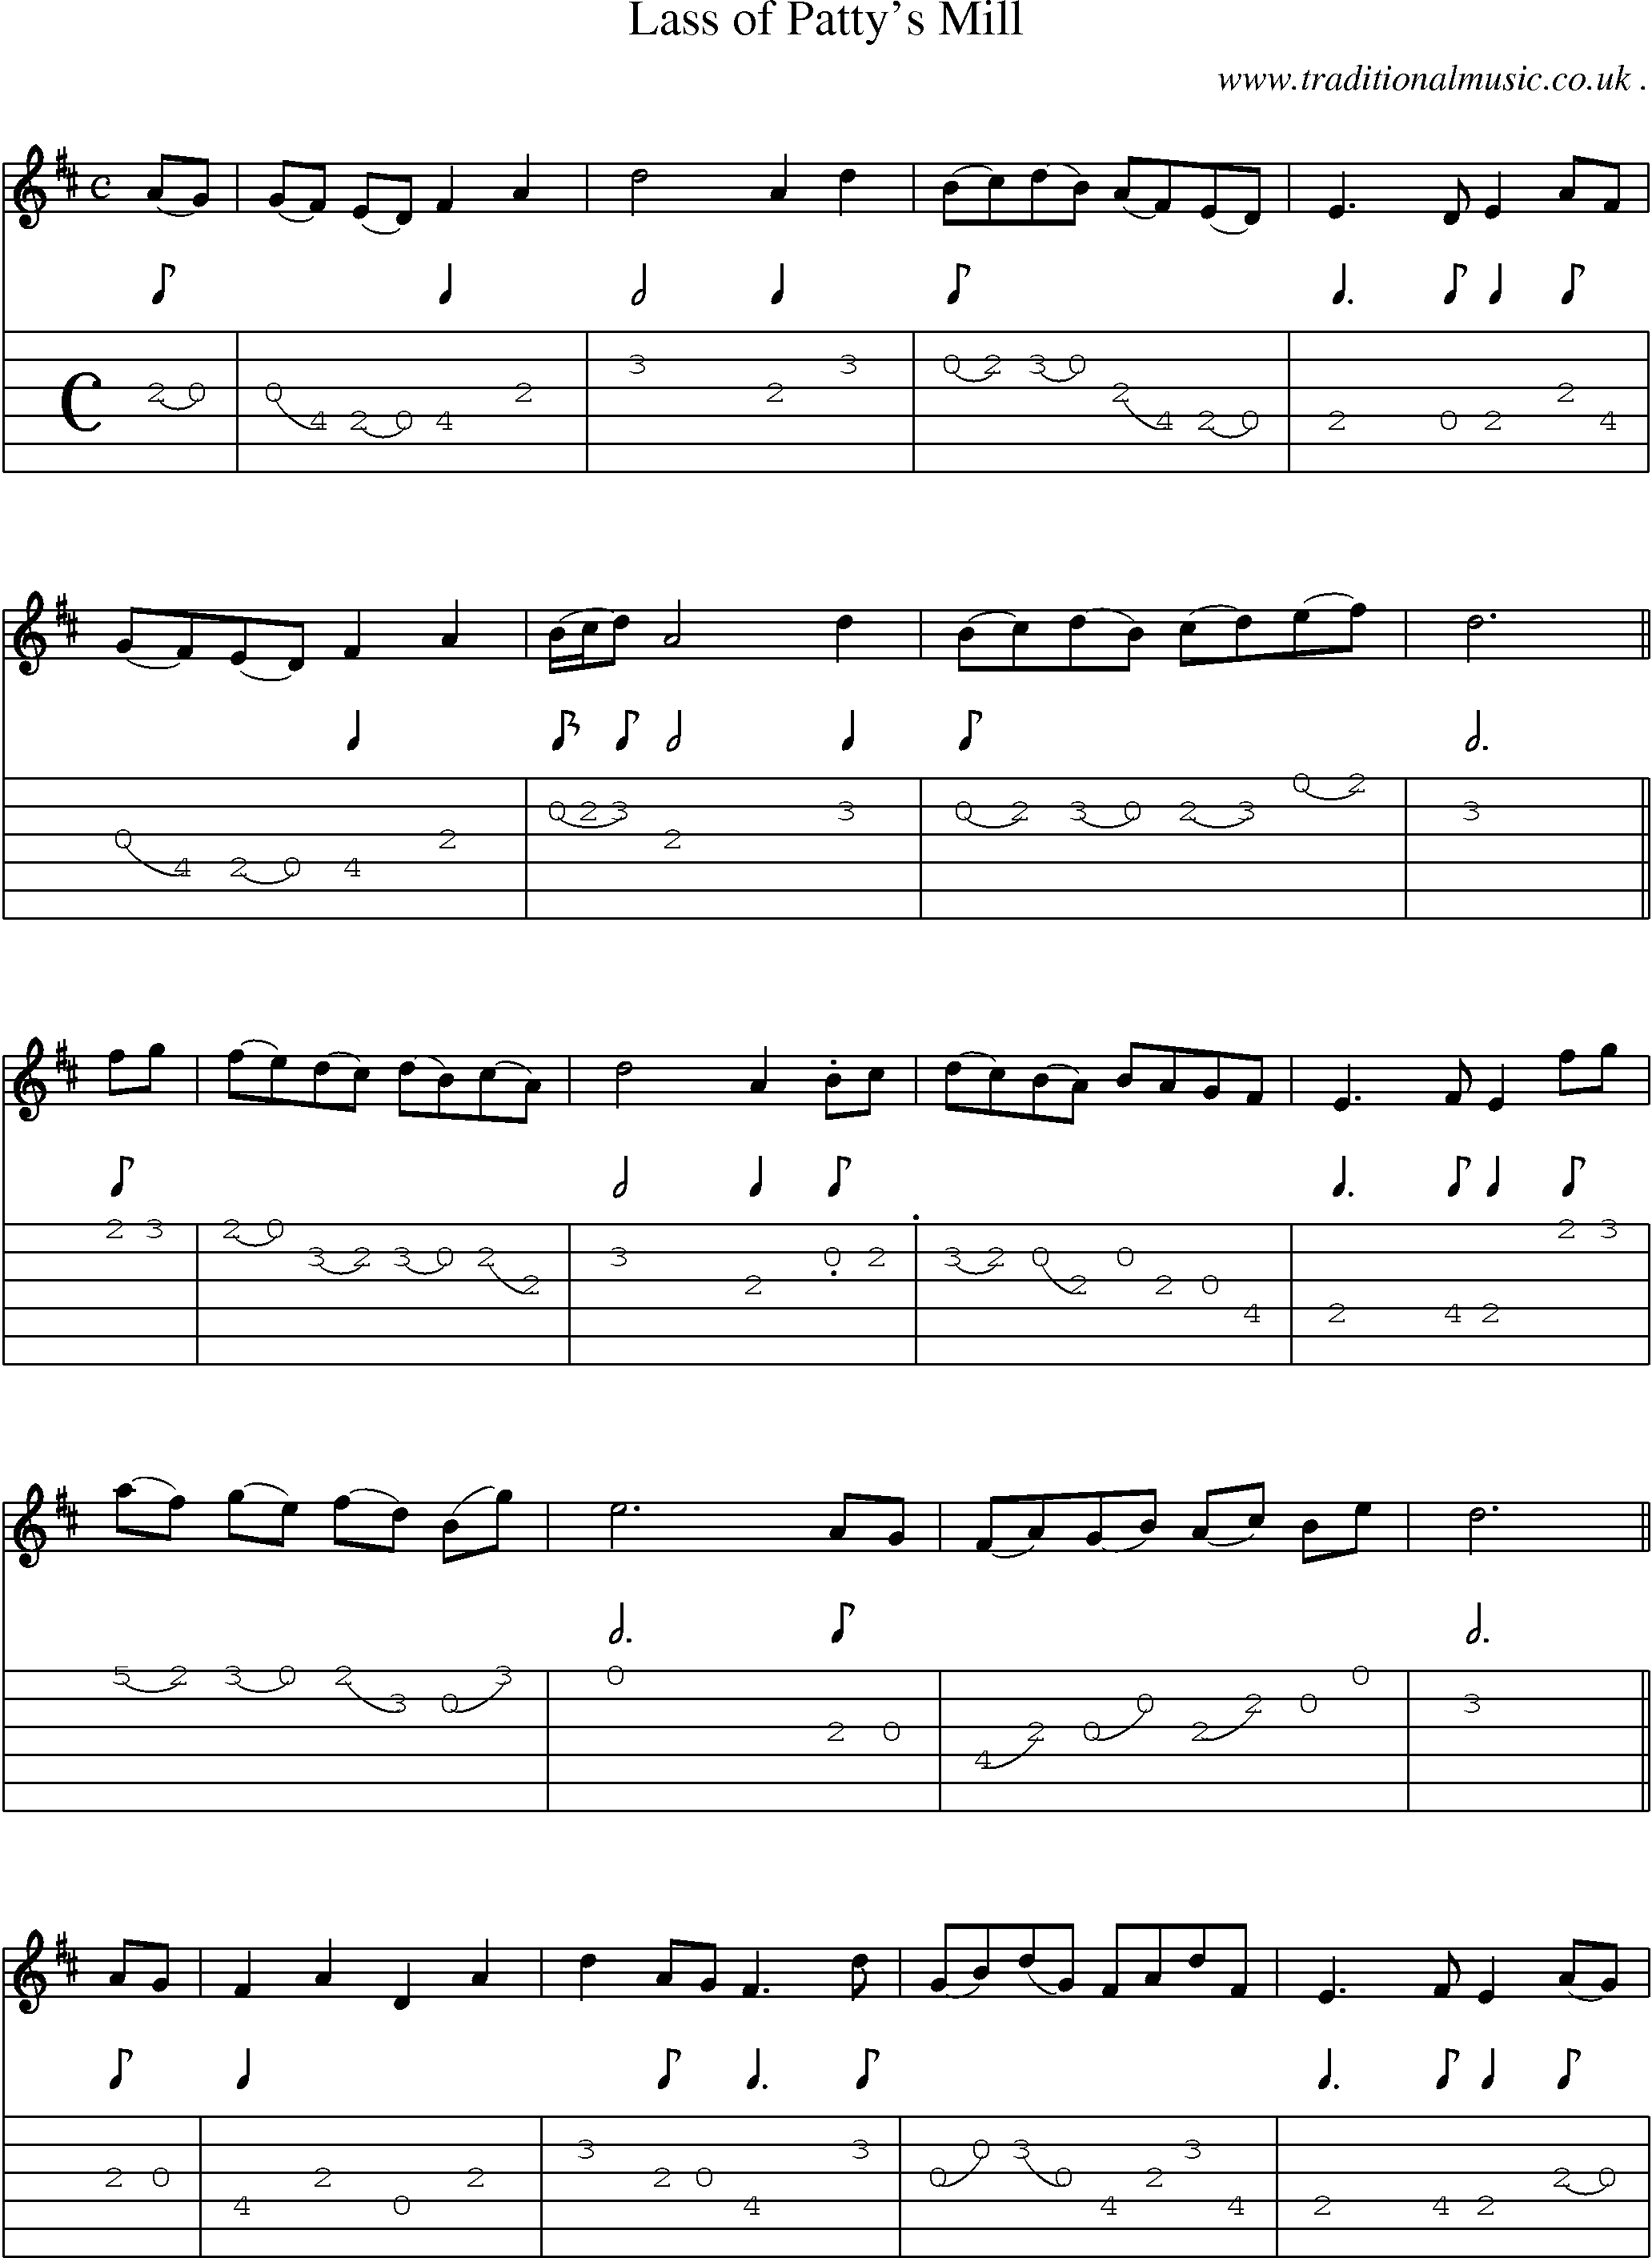 Sheet-Music and Guitar Tabs for Lass Of Pattys Mill